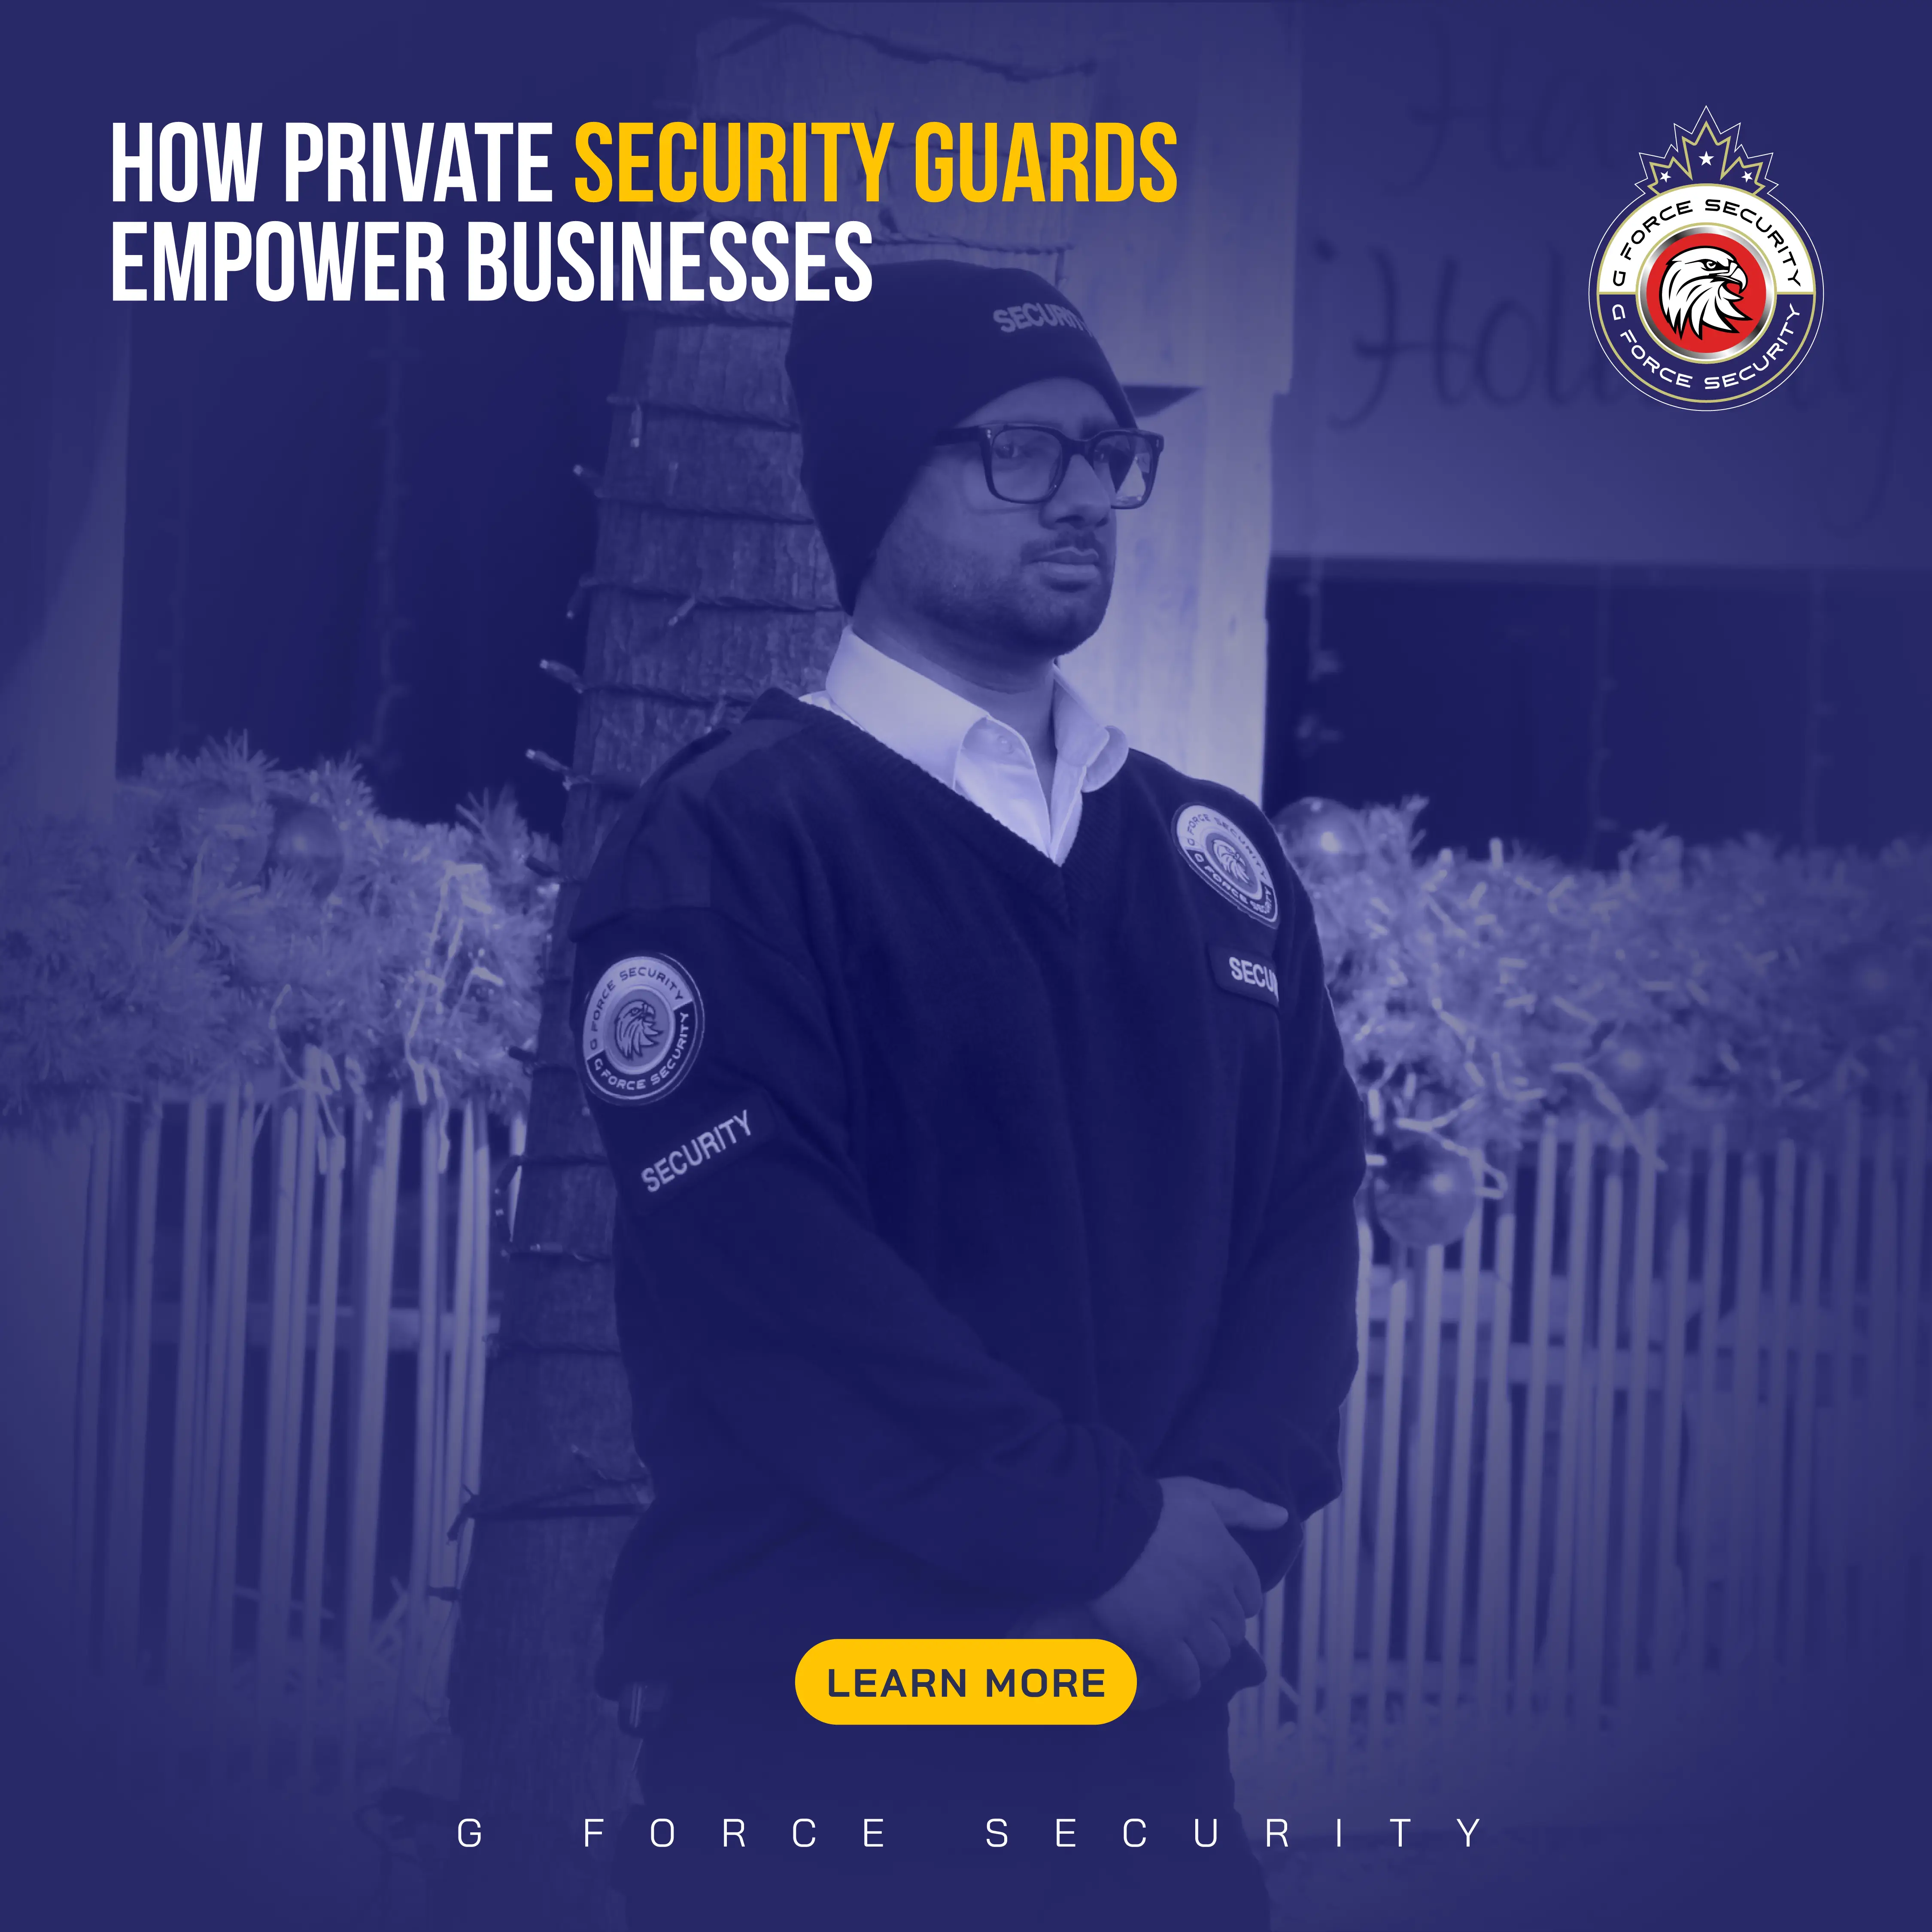 How Private Security Guards Empower Businesses